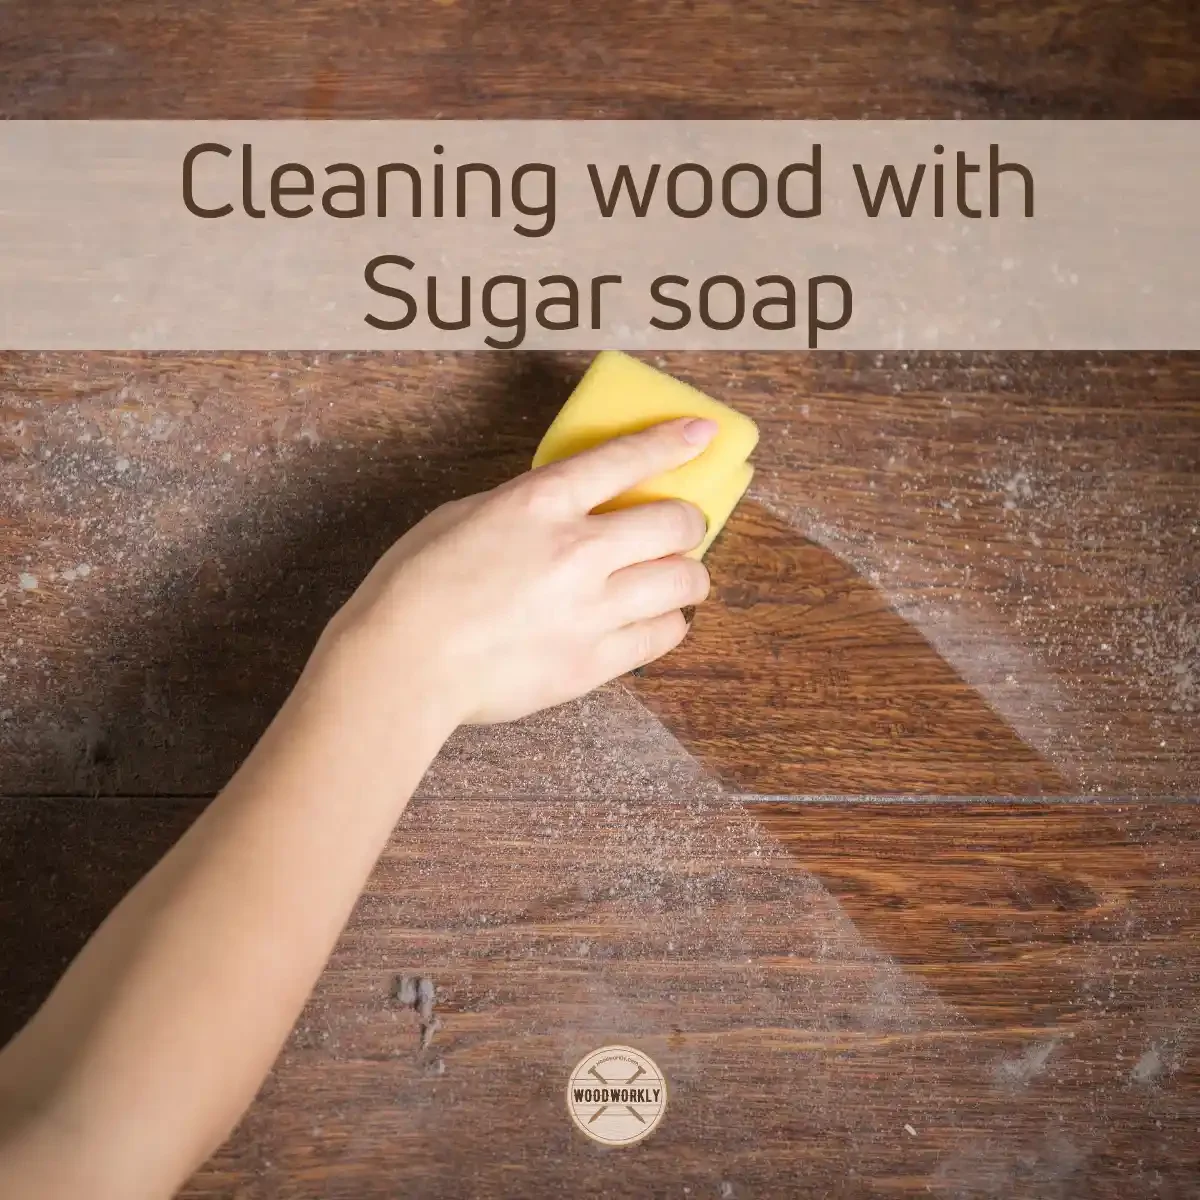 Cleaning wood with Sugar soap